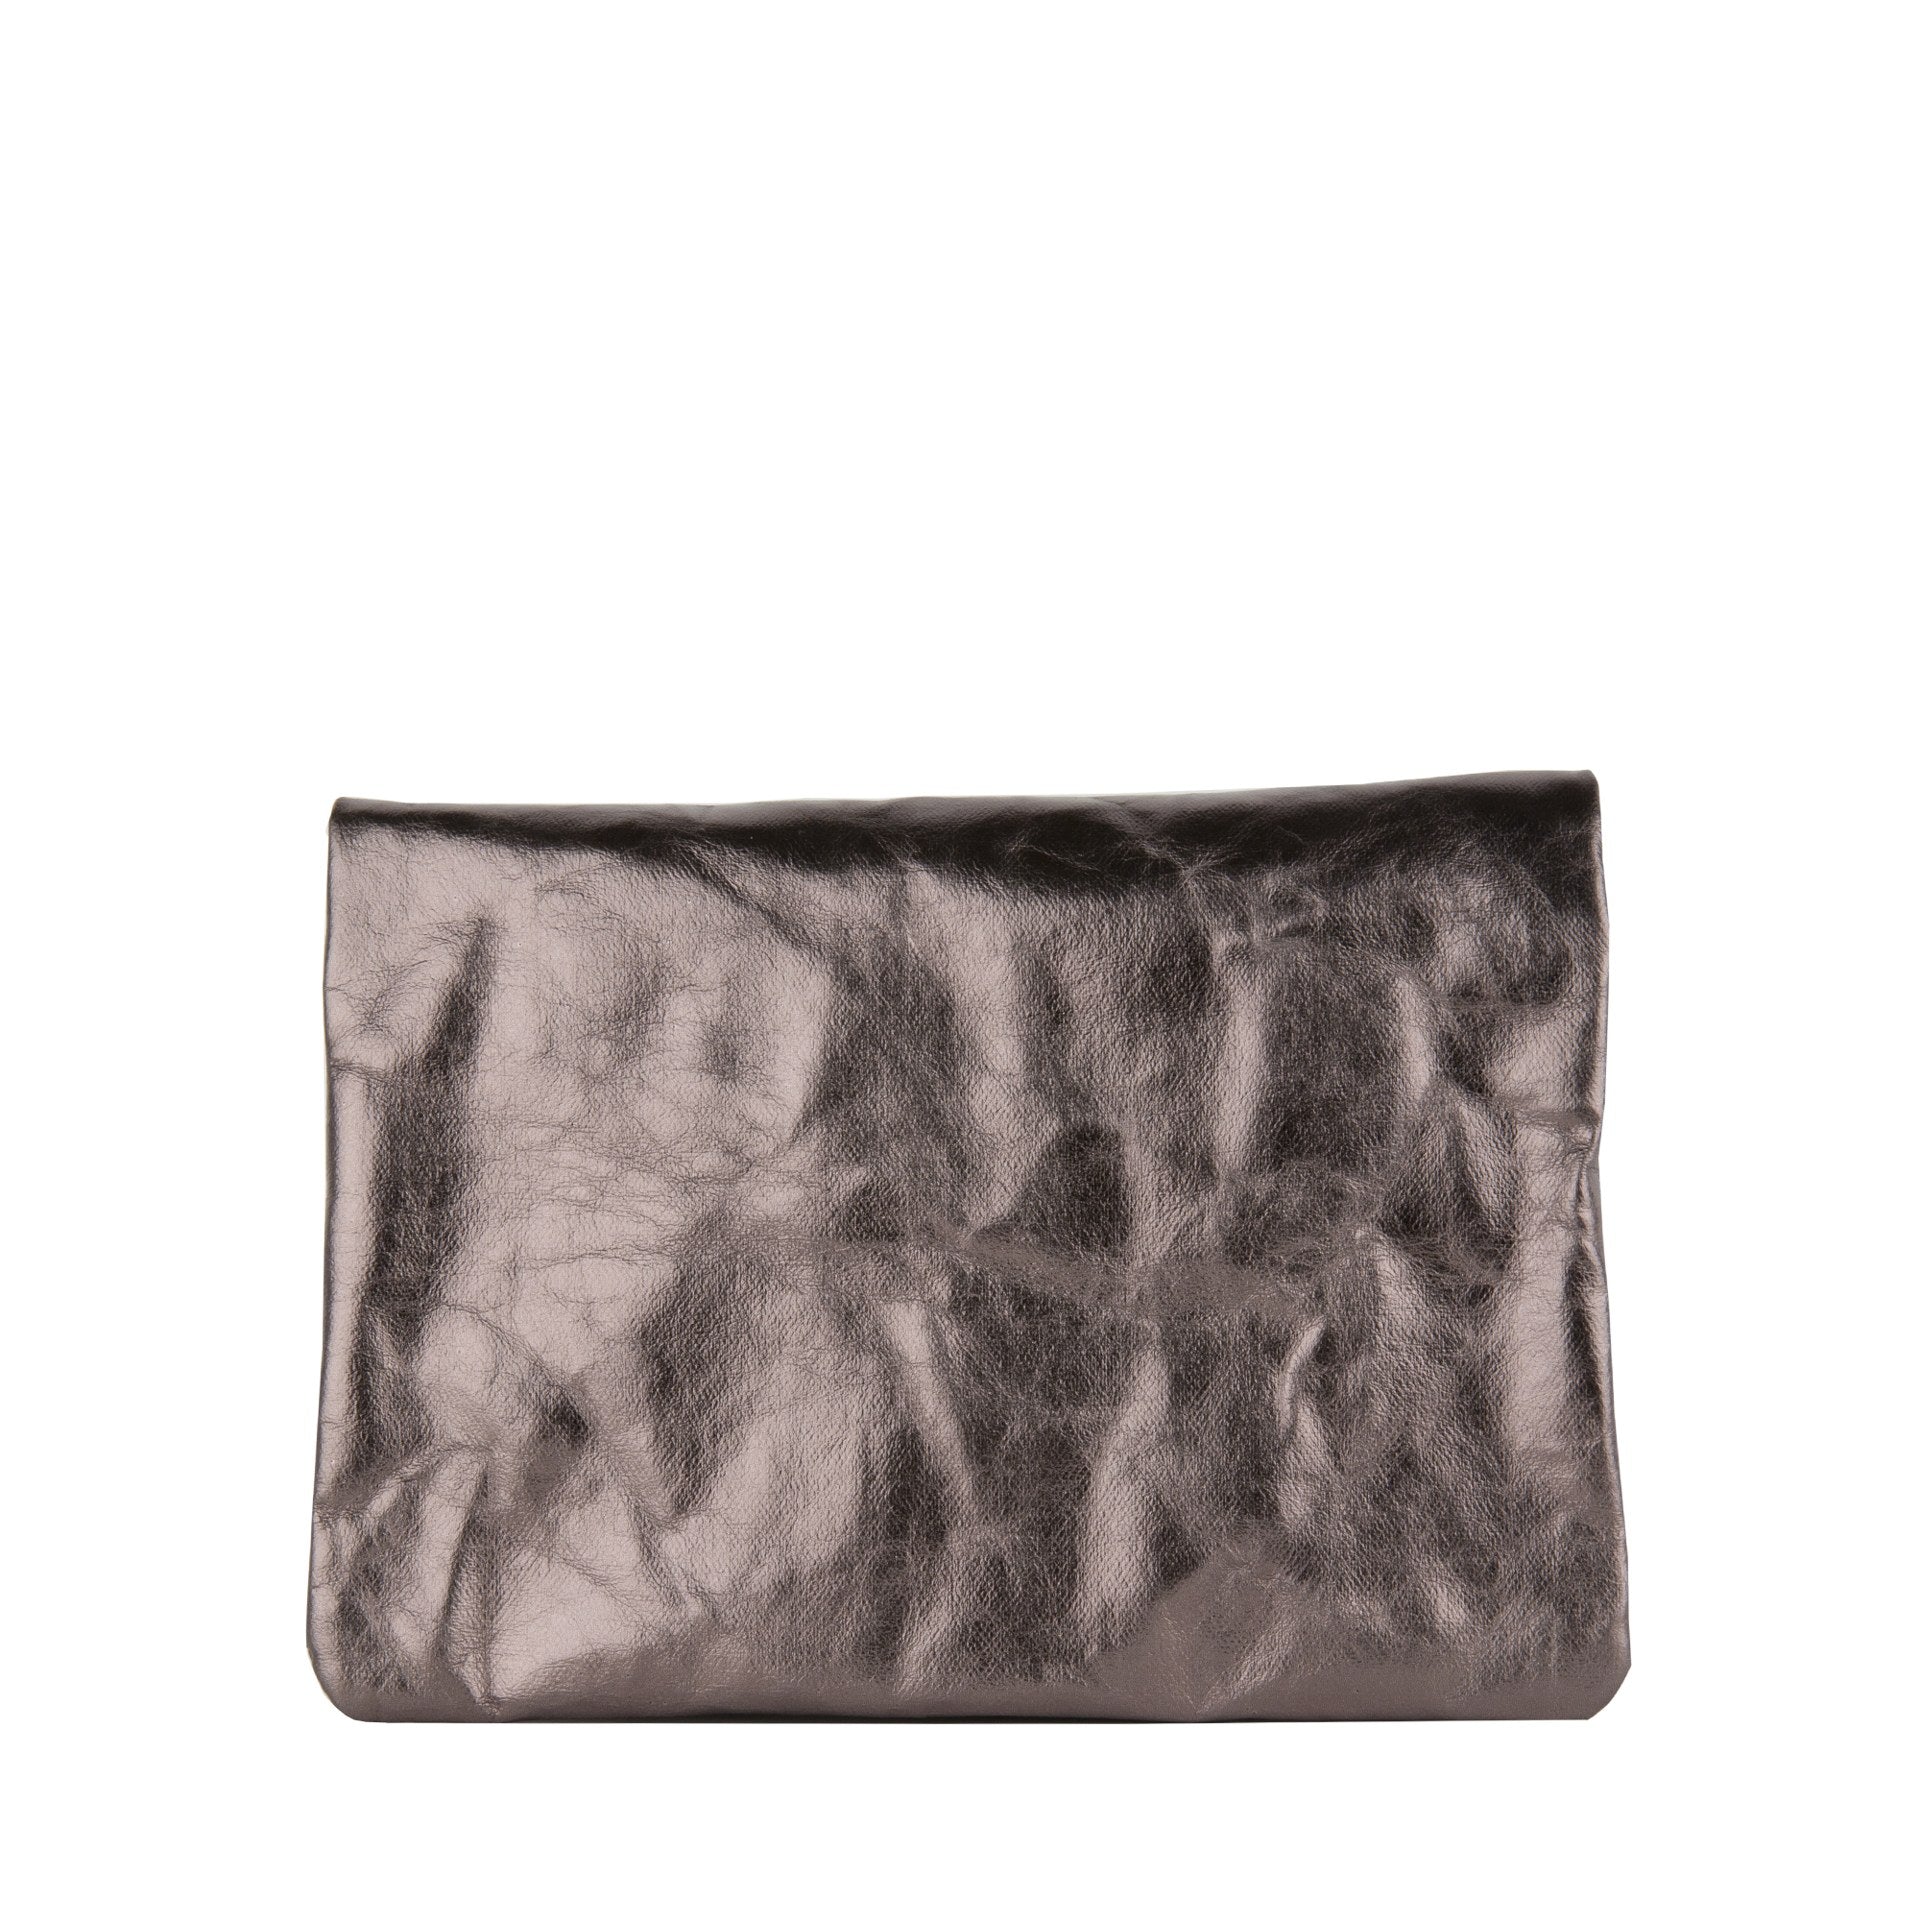 A metallic pewter washable paper folded clutch is shown from the front.